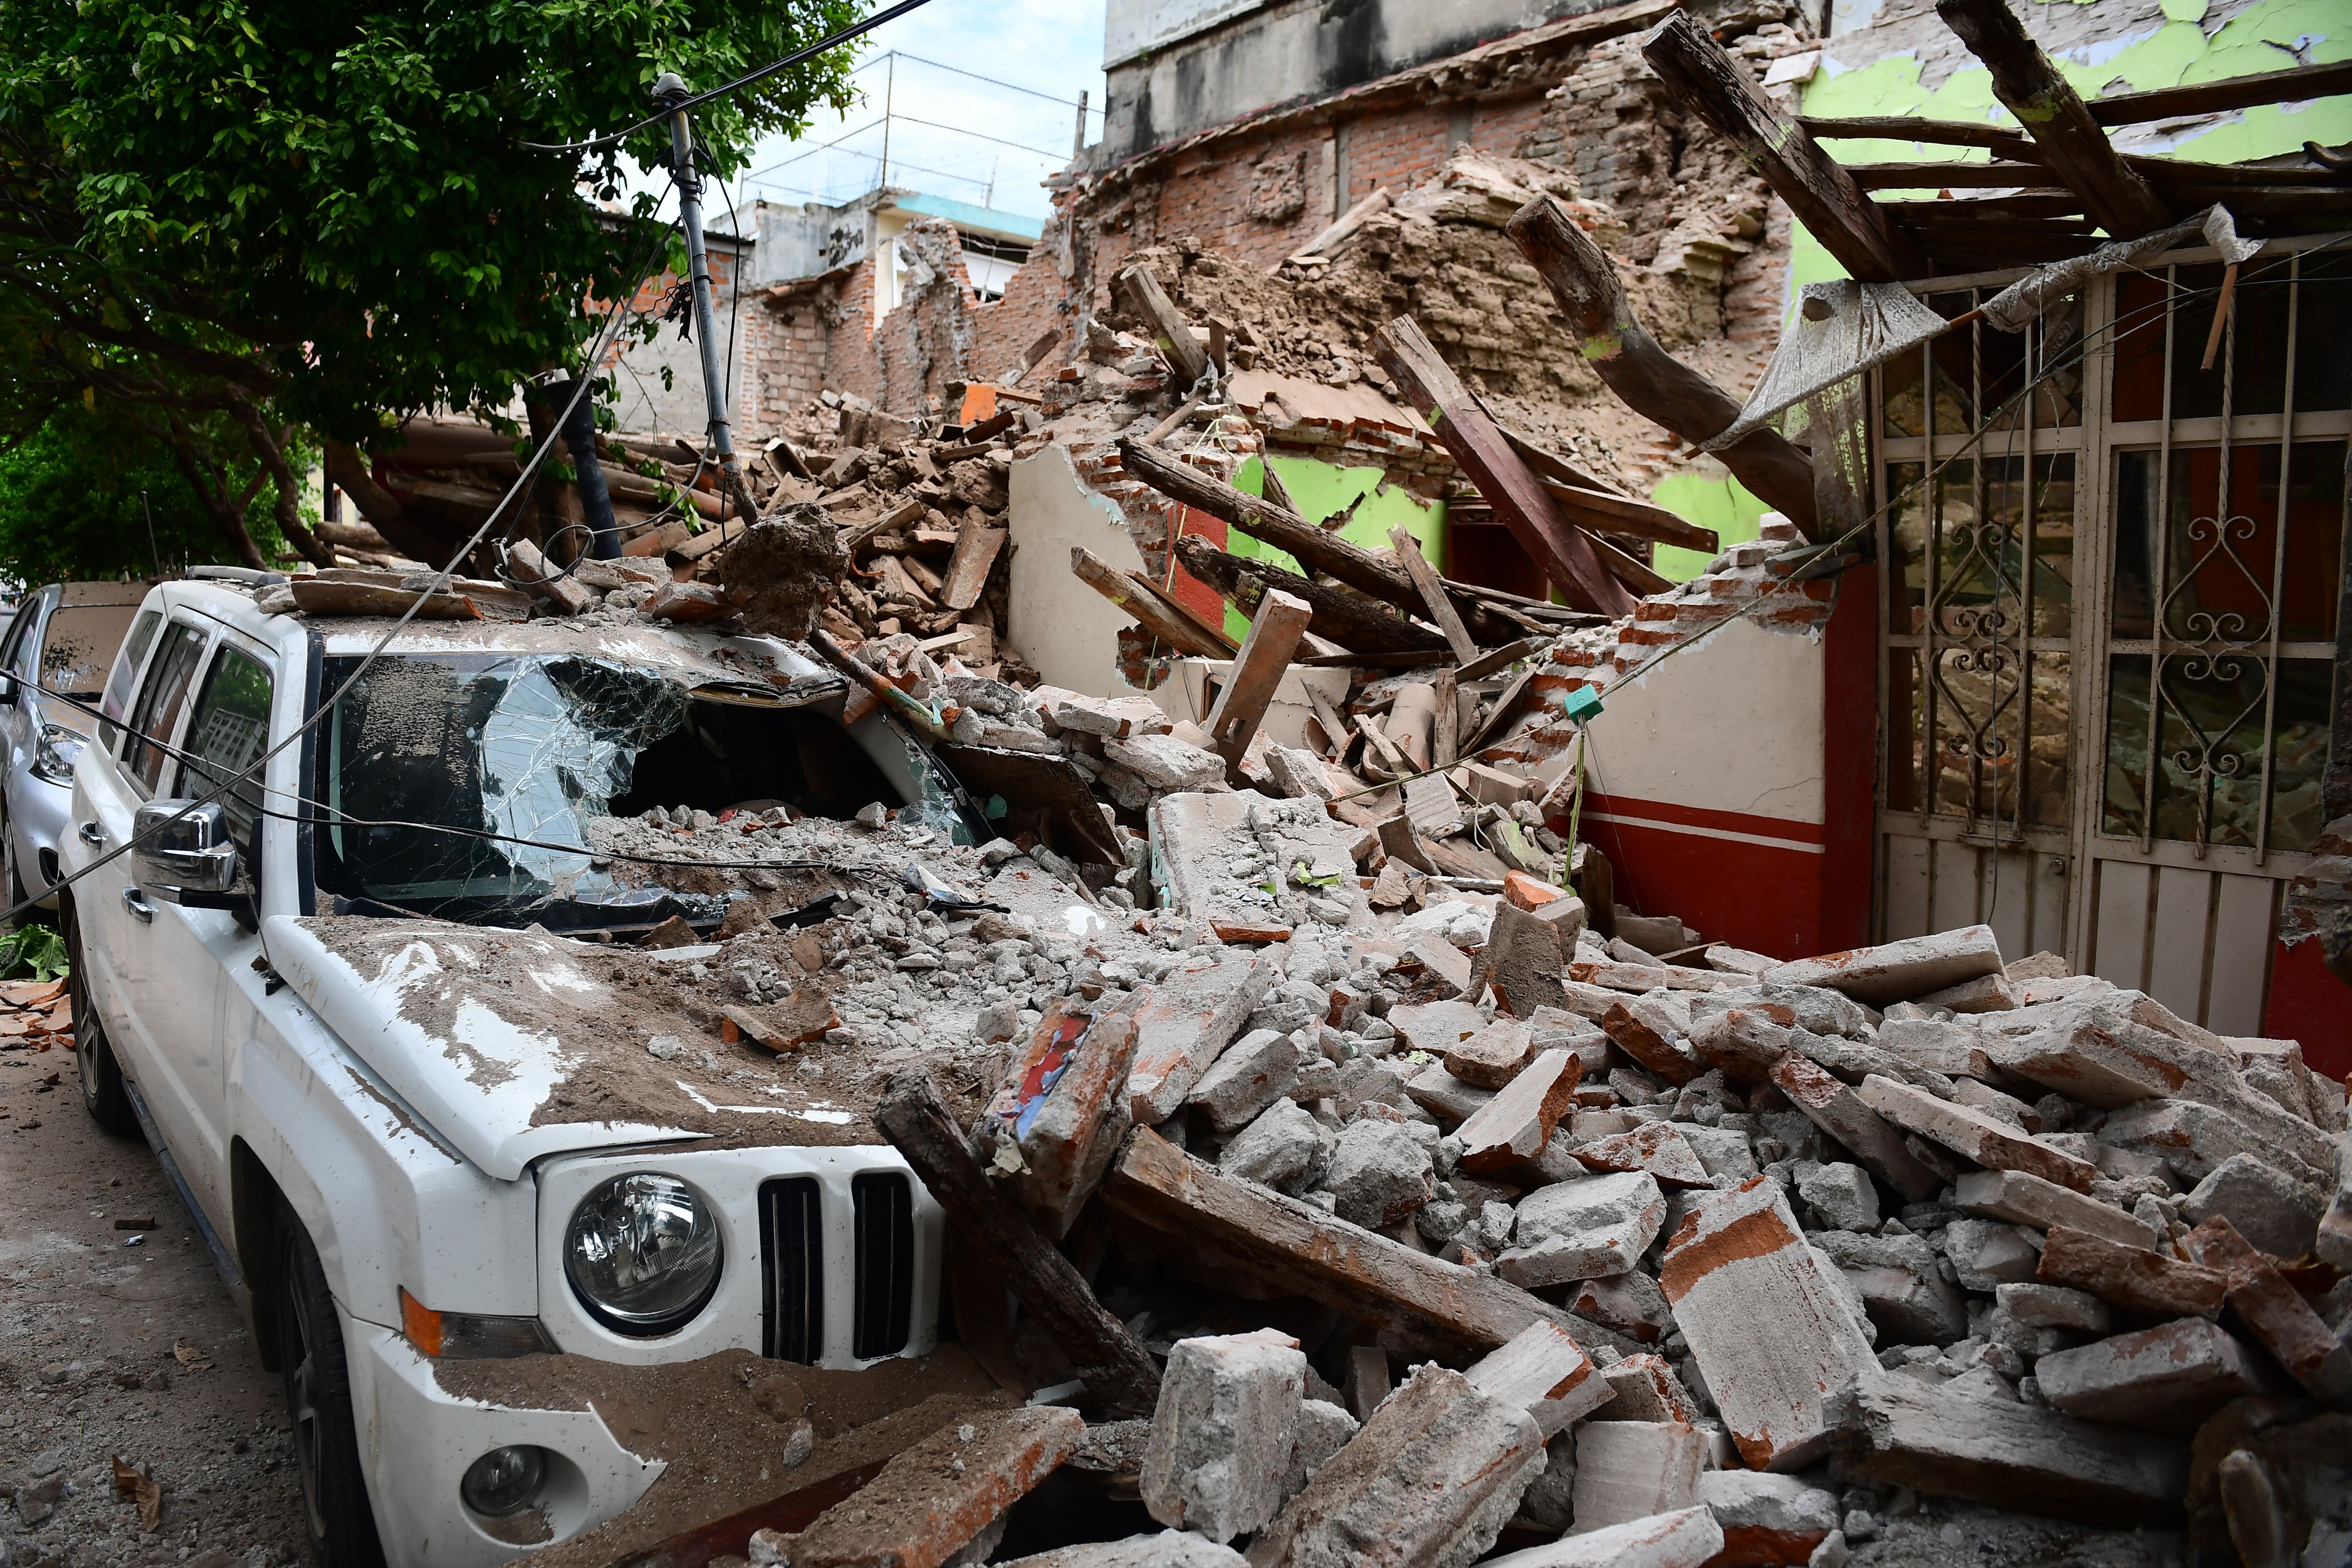 View of damages caused by the 8.2 magnitude earthquake that hit Mexico's Pacific coast, in Juchitan de Zaragoza, state of Oaxaca on September 8, 2017. Mexico's most powerful earthquake in a century killed at least 35 people, officials said, after it struck the Pacific coast, wrecking homes and sending families fleeing into the streets. / AFP PHOTO / RONALDO SCHEMIDT (Photo credit should read RONALDO SCHEMIDT/AFP/Getty Images)